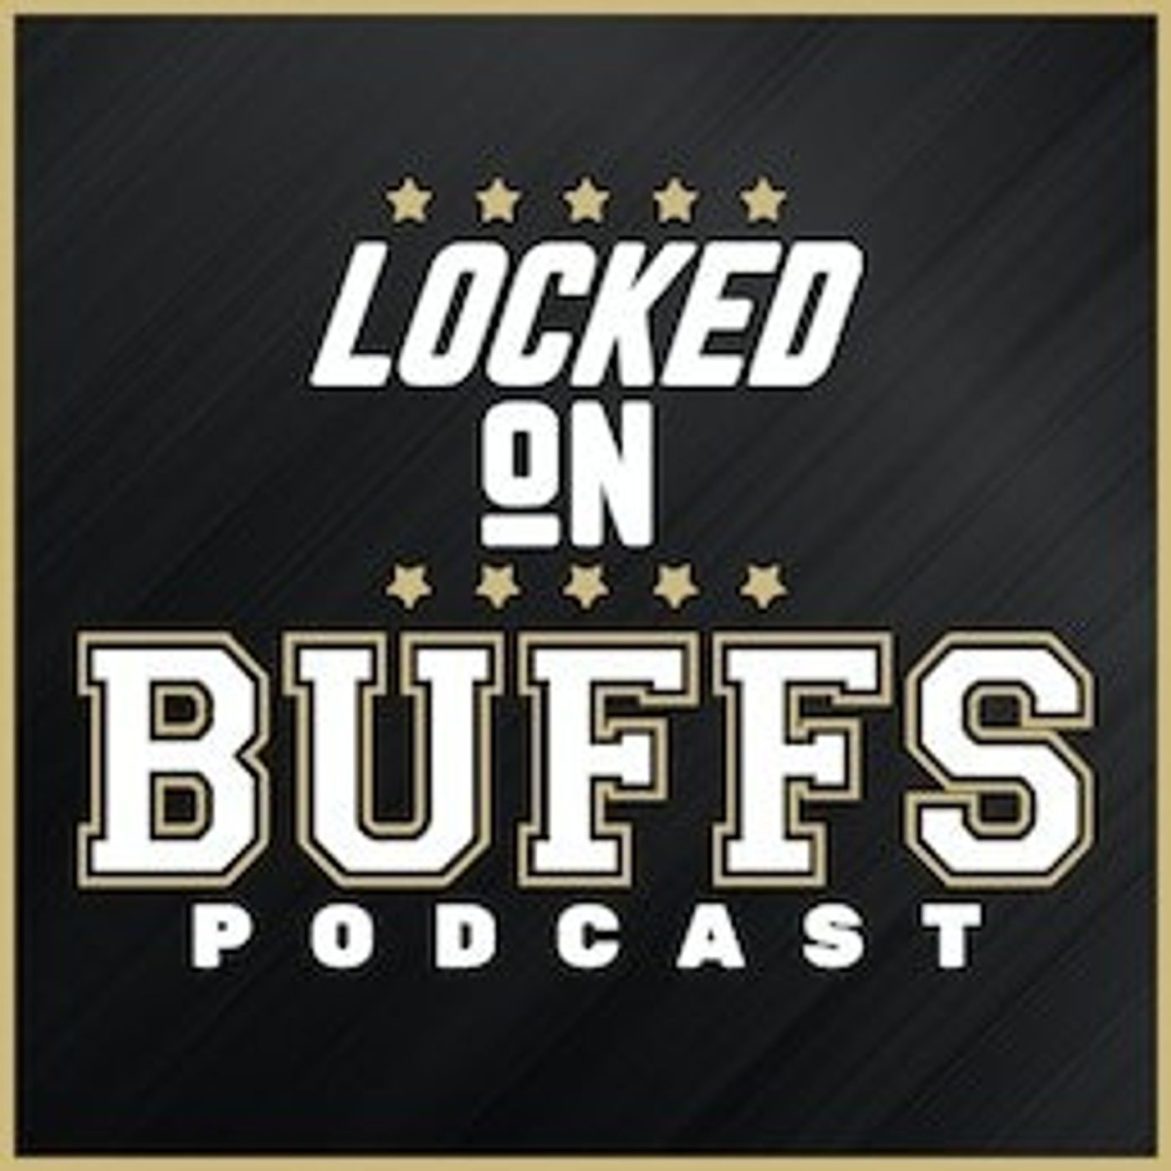 Black Podcasting - What&apos;s going on with Deion Sanders and Colorado Now?